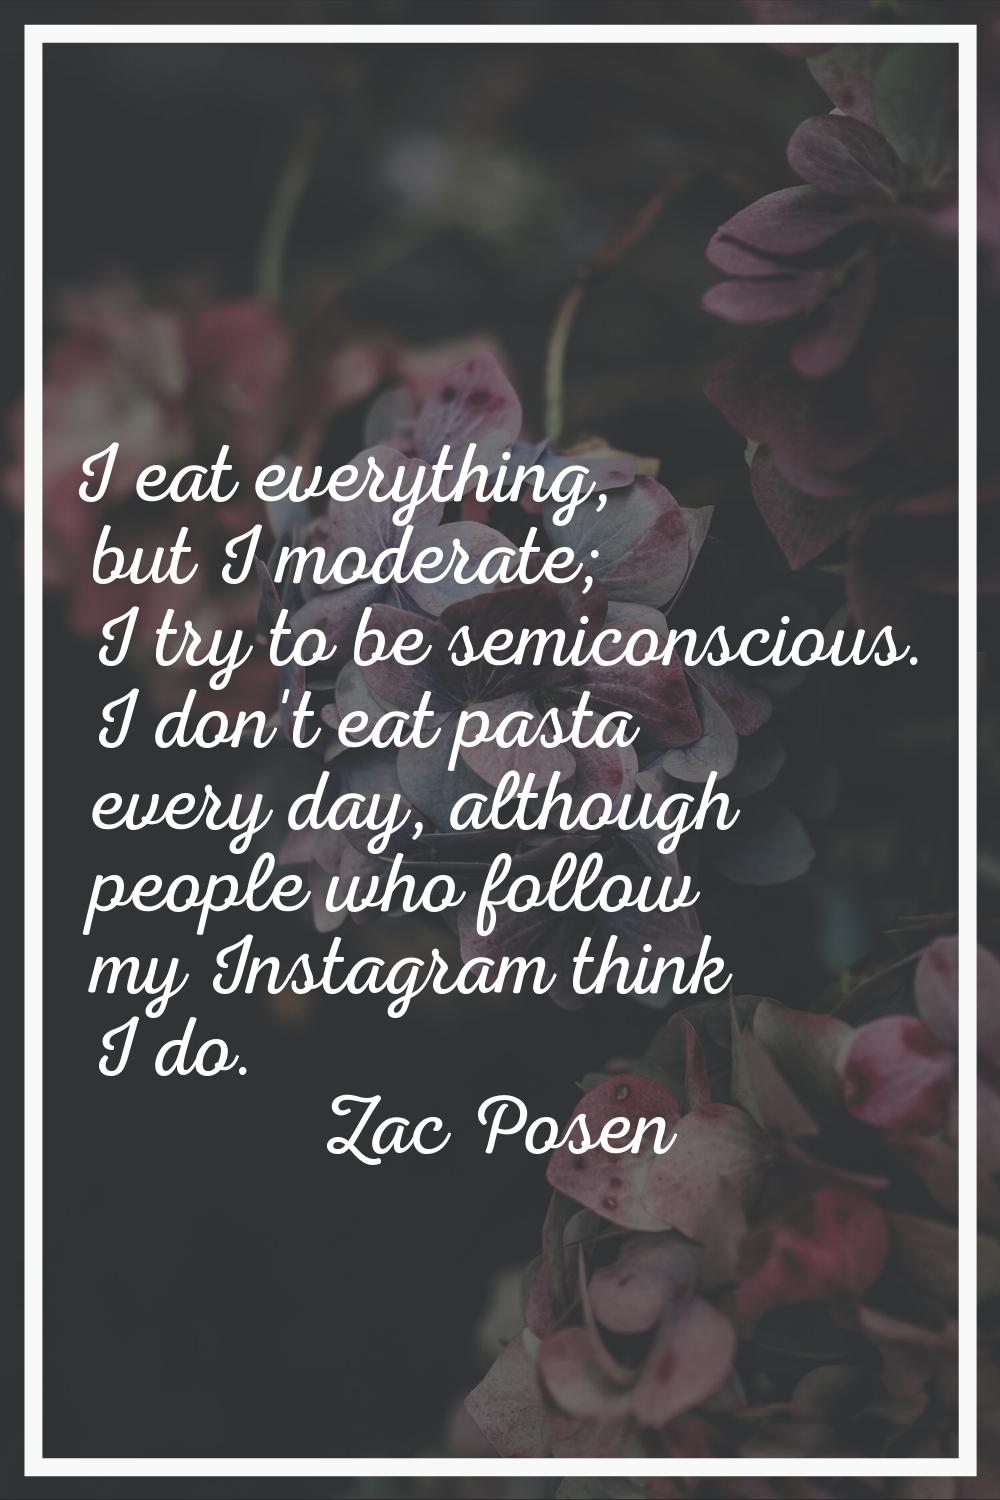 I eat everything, but I moderate; I try to be semiconscious. I don't eat pasta every day, although 